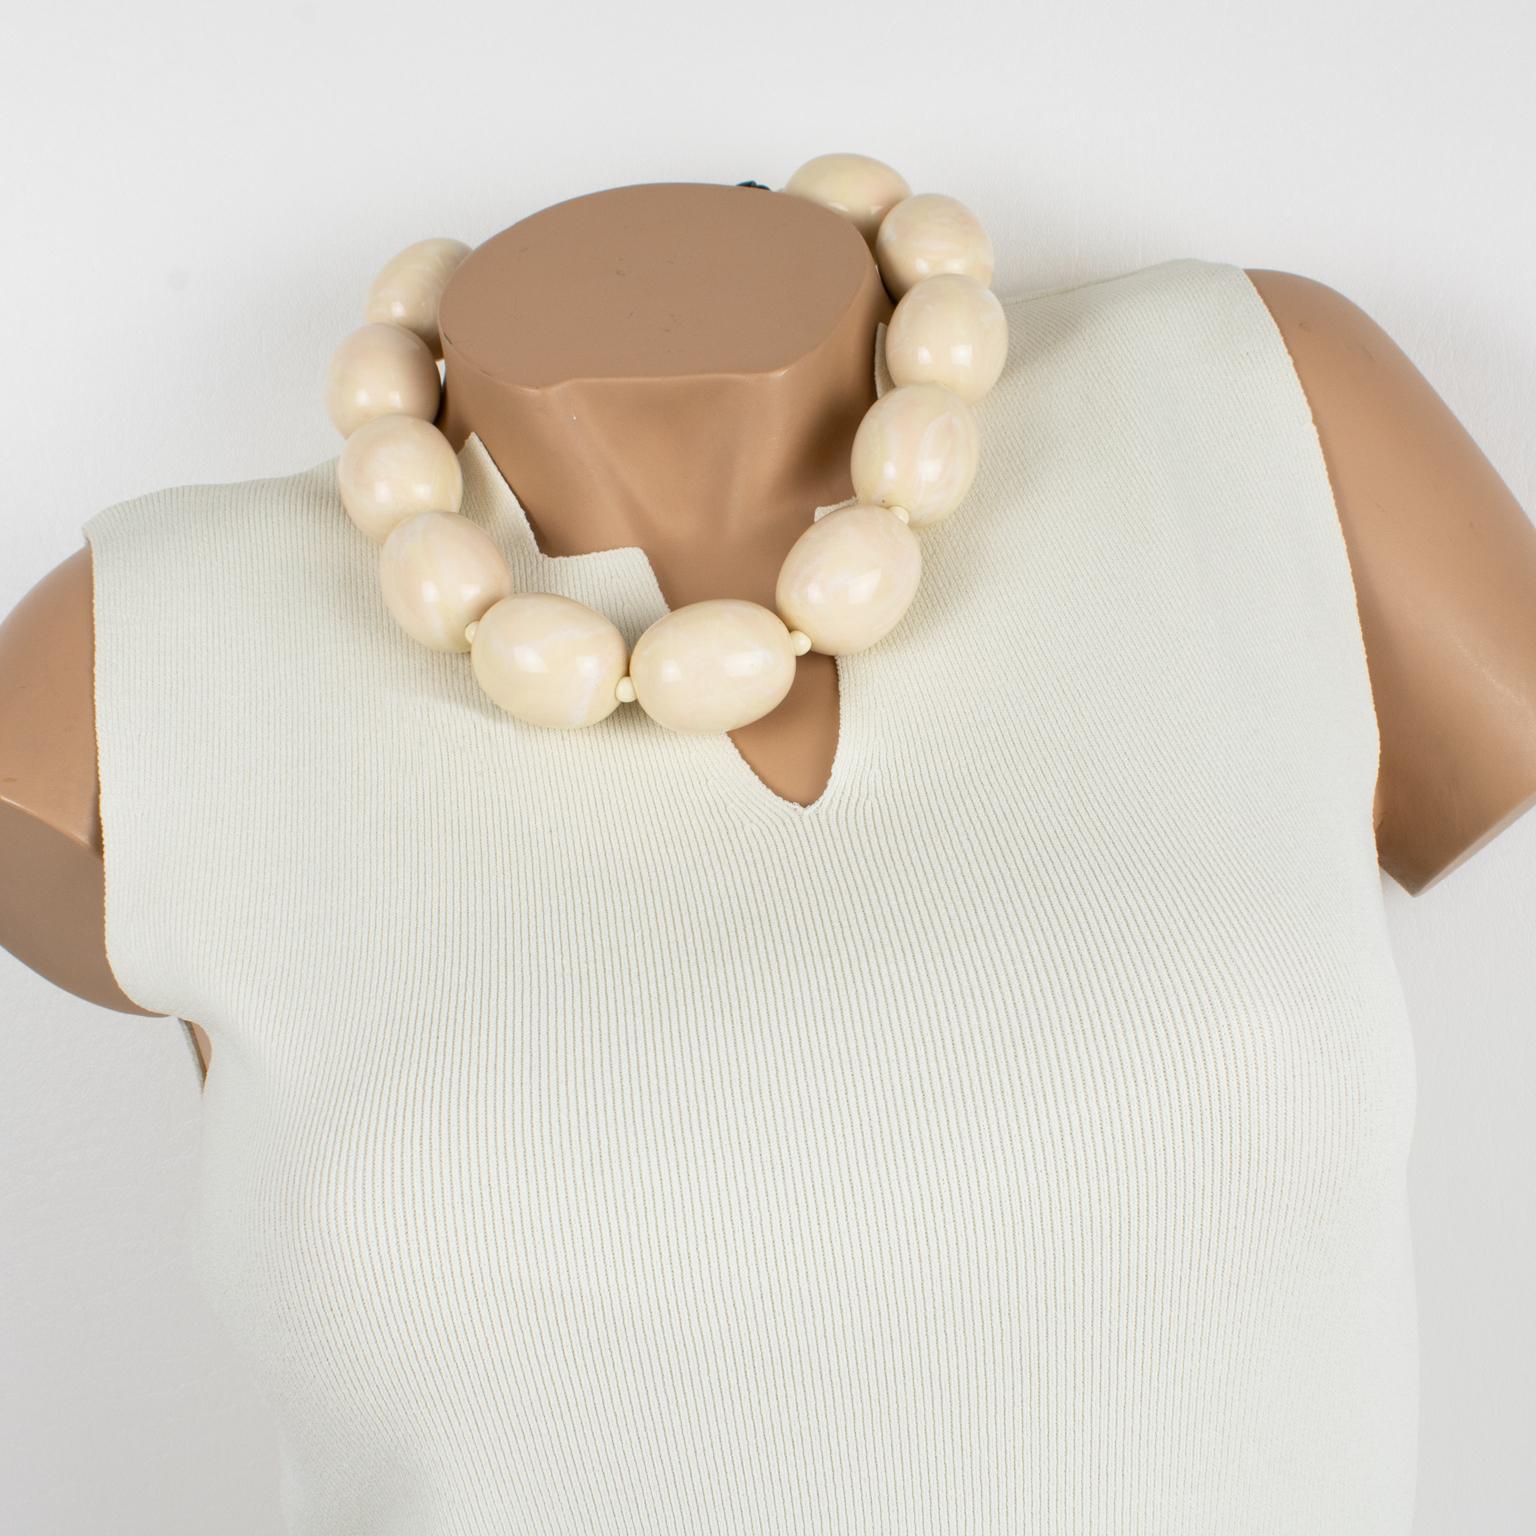 Classy Angela Caputi, made in Italy resin choker necklace. This necklace features a minimalist shape with oversized ovoid beads in ivory color with a pink overtone swirling. Her matching of colors is always extremely classy, perfect for casual and